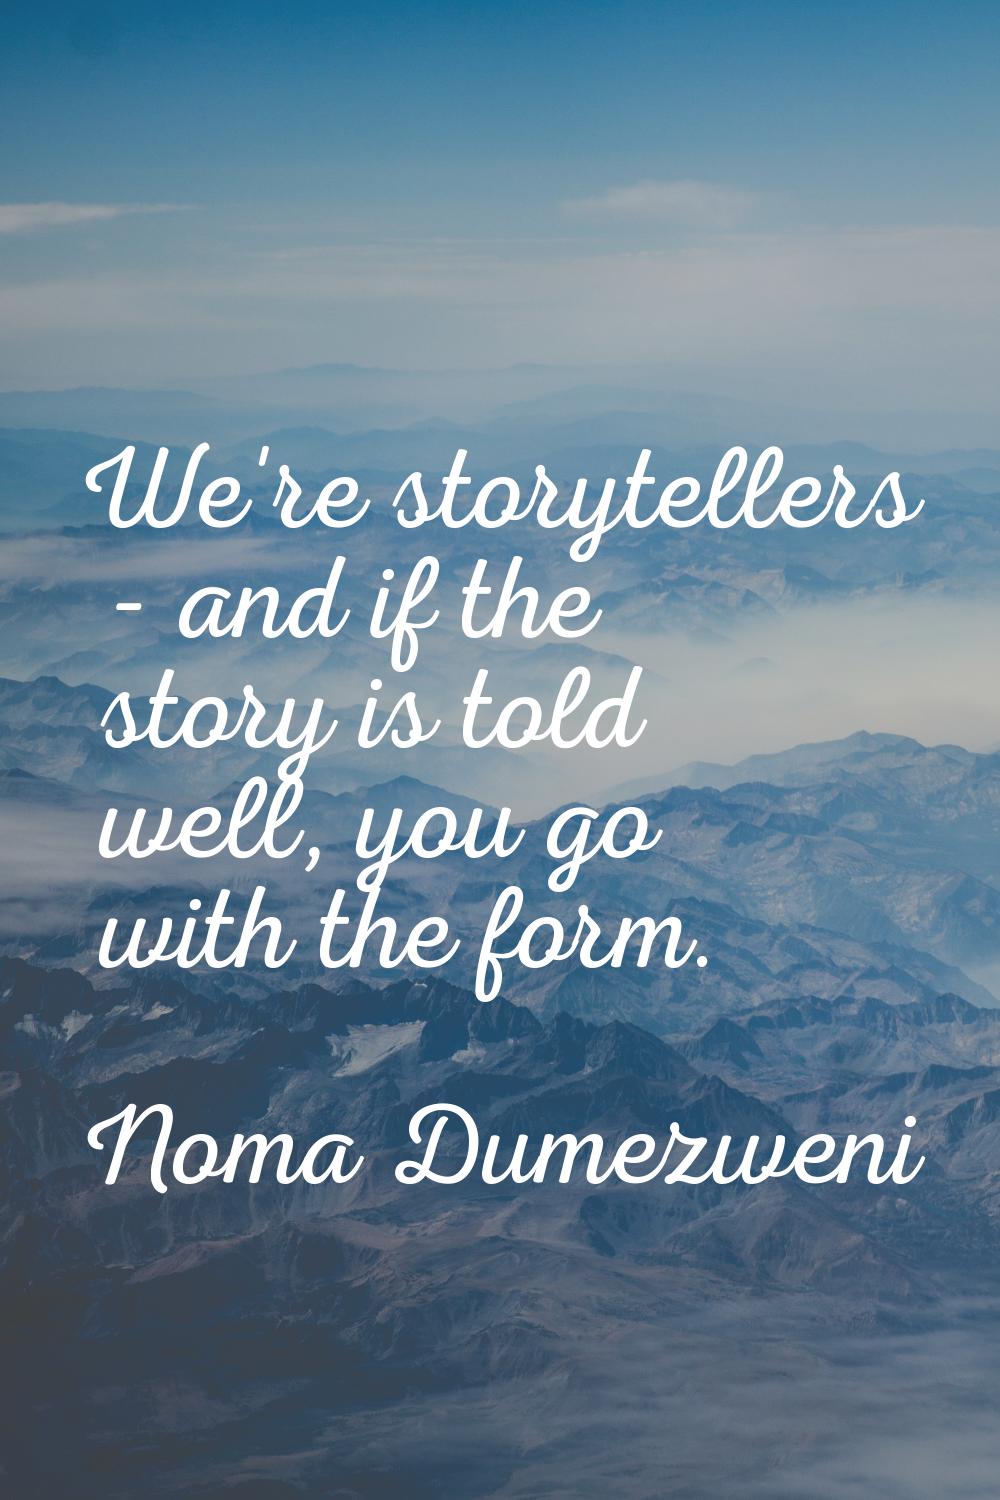 We're storytellers - and if the story is told well, you go with the form.